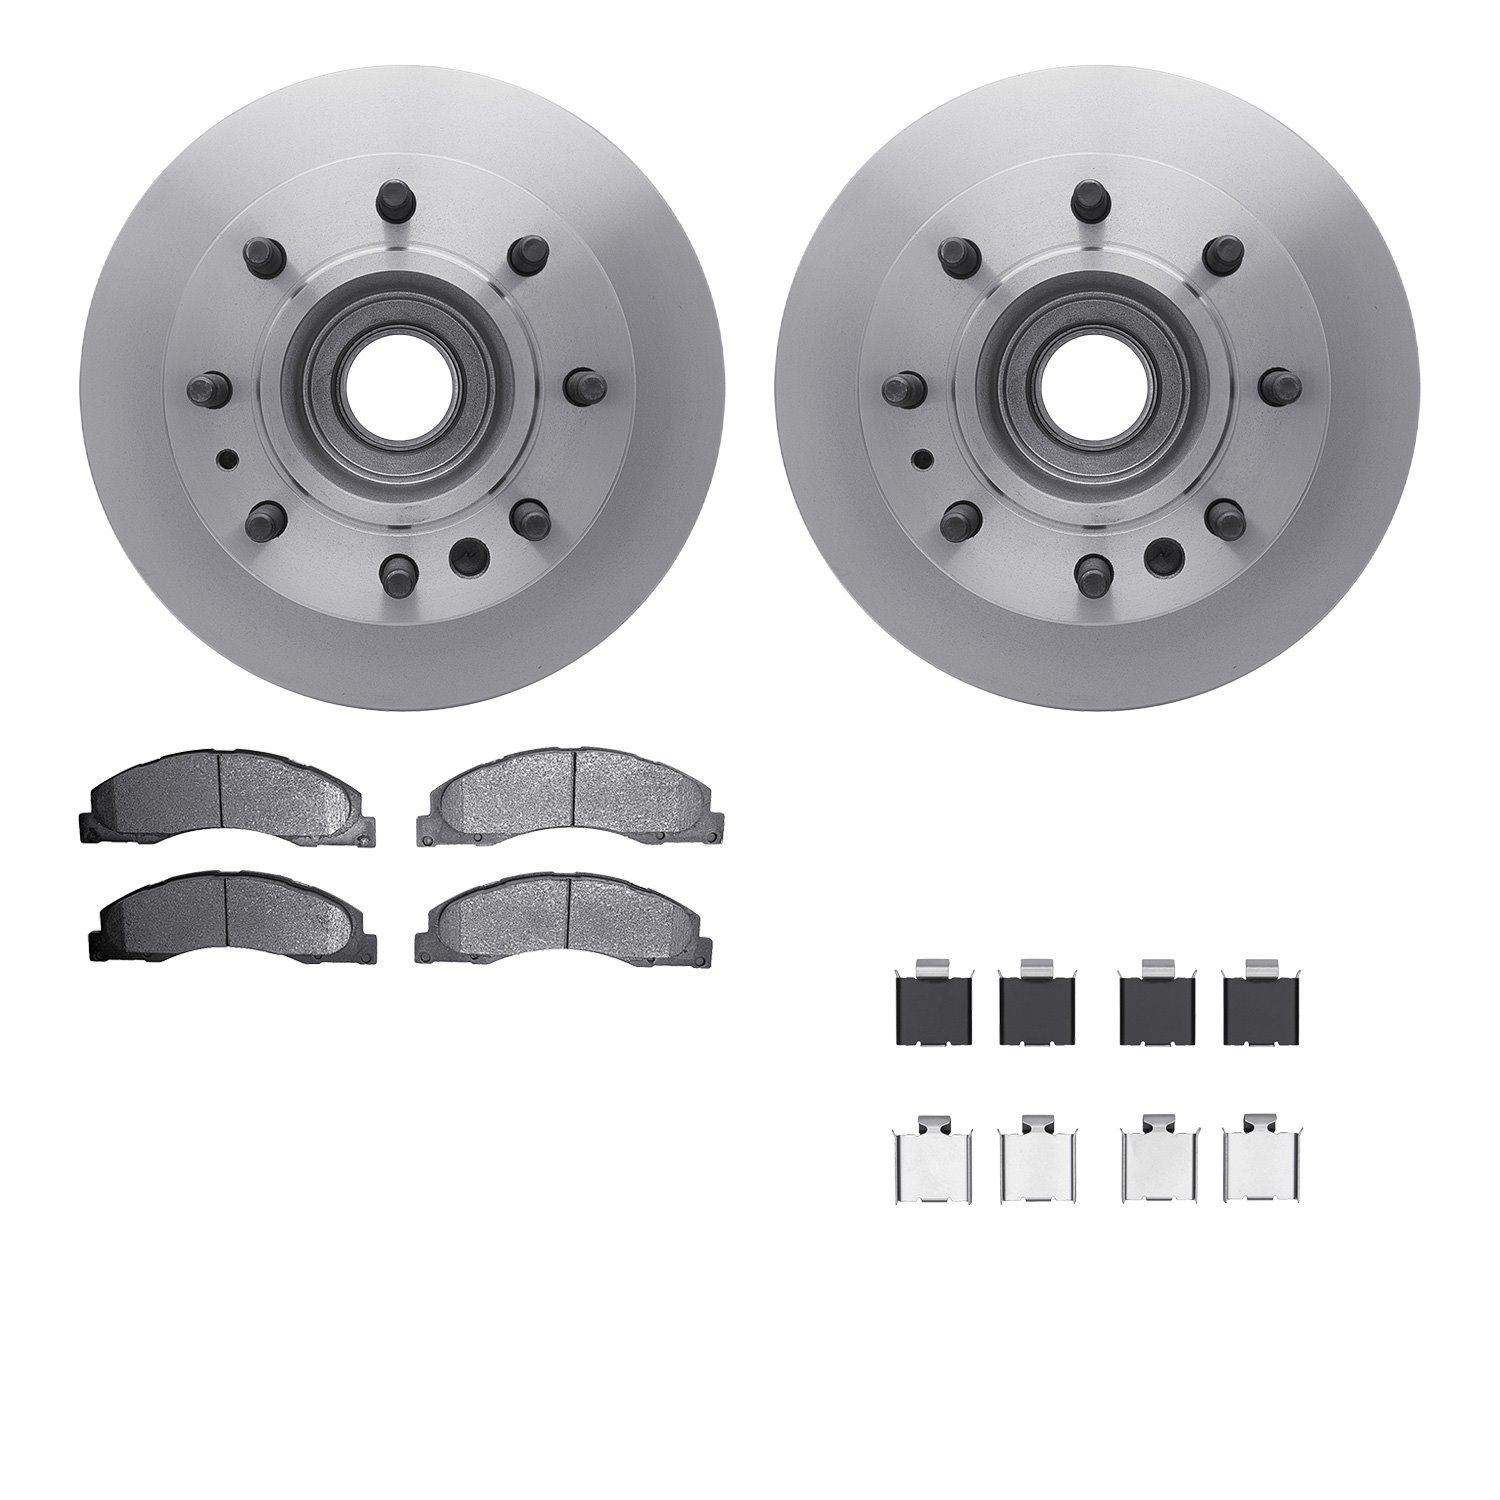 6212-99663 Brake Rotors w/Heavy-Duty Brake Pads Kit & Hardware, Fits Select Ford/Lincoln/Mercury/Mazda, Position: Front